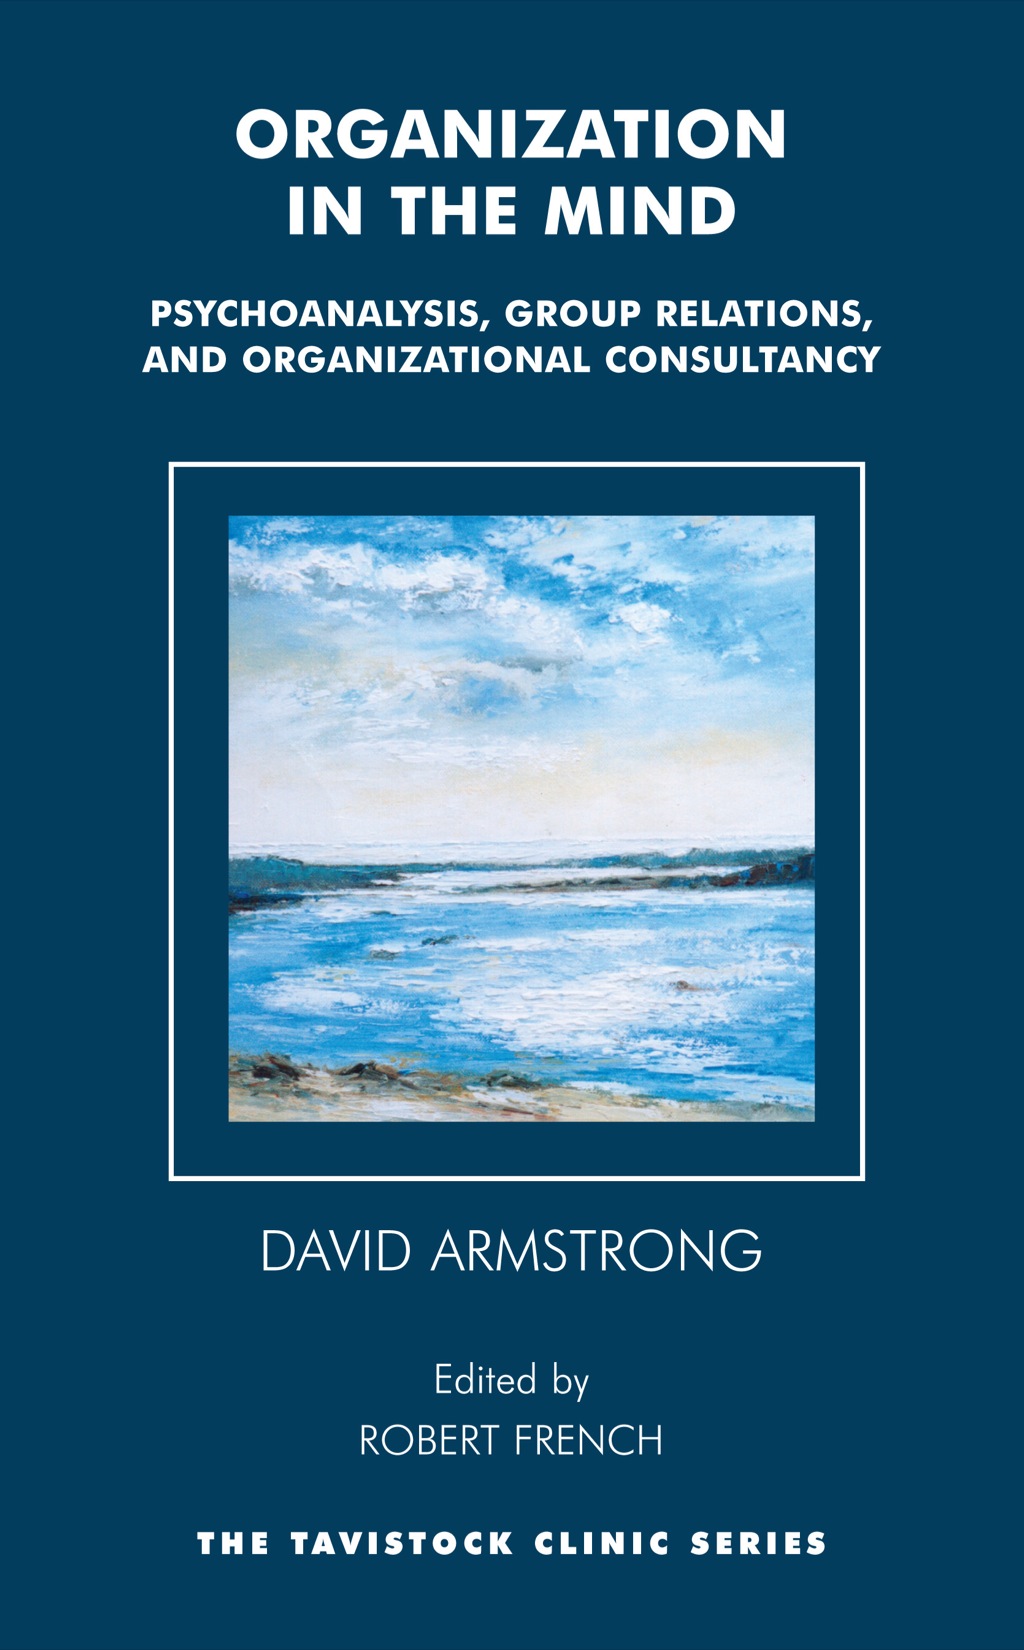 Organization in the Mind (eBook) - David Armstrong